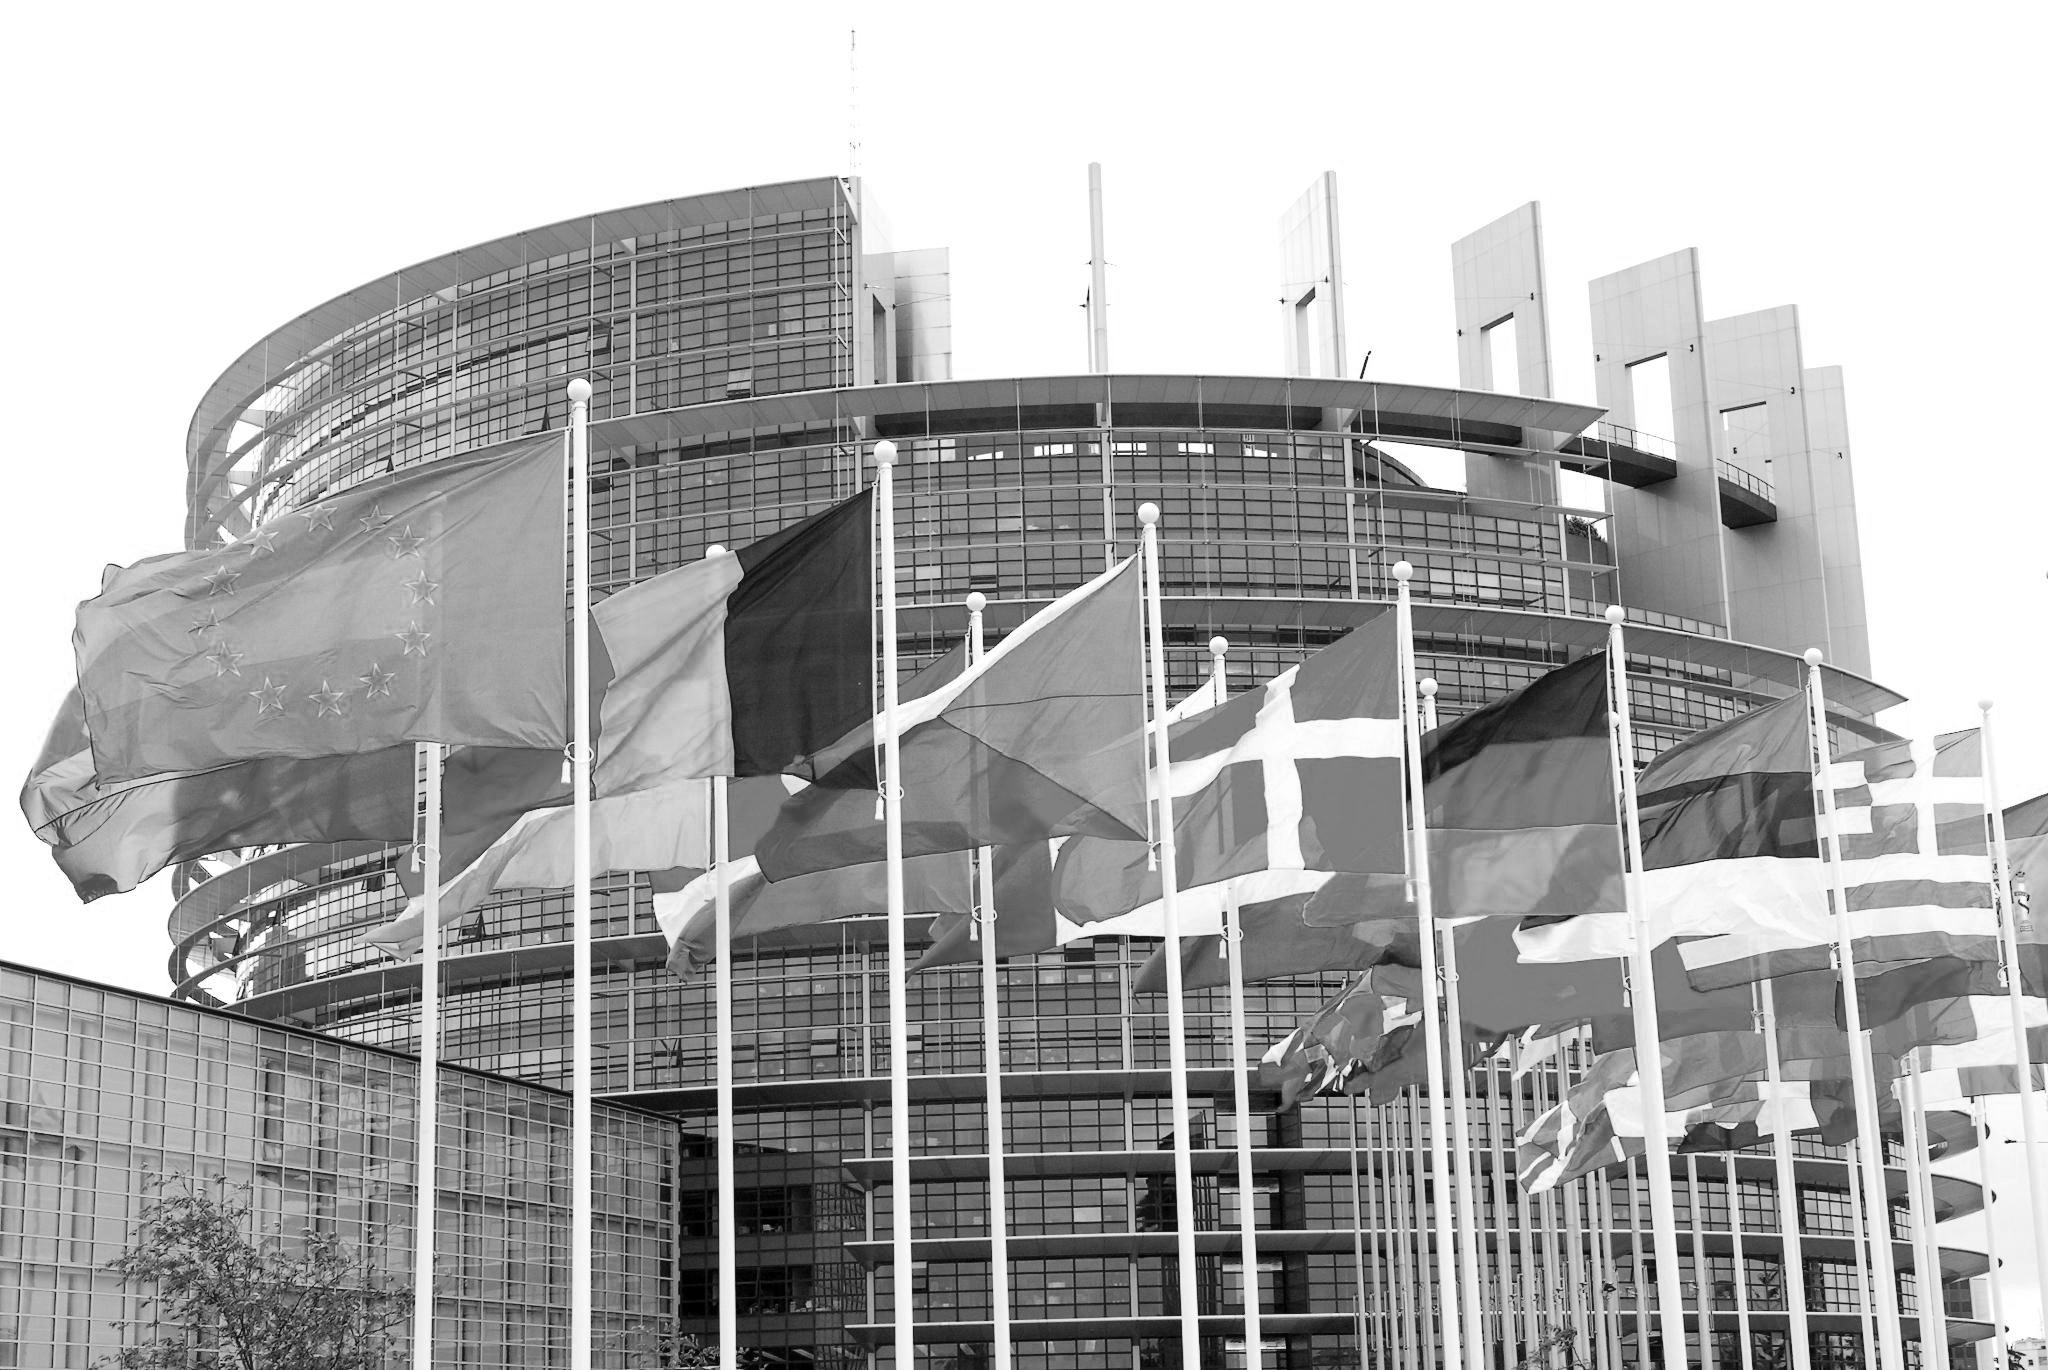 Newsalert | Europe first: the judgment of the German Federal Constitutional Court on the Public Sector Purchase Programme (PSPP) of the European Central Bank (ECB) and the reply of the EU Institutions.